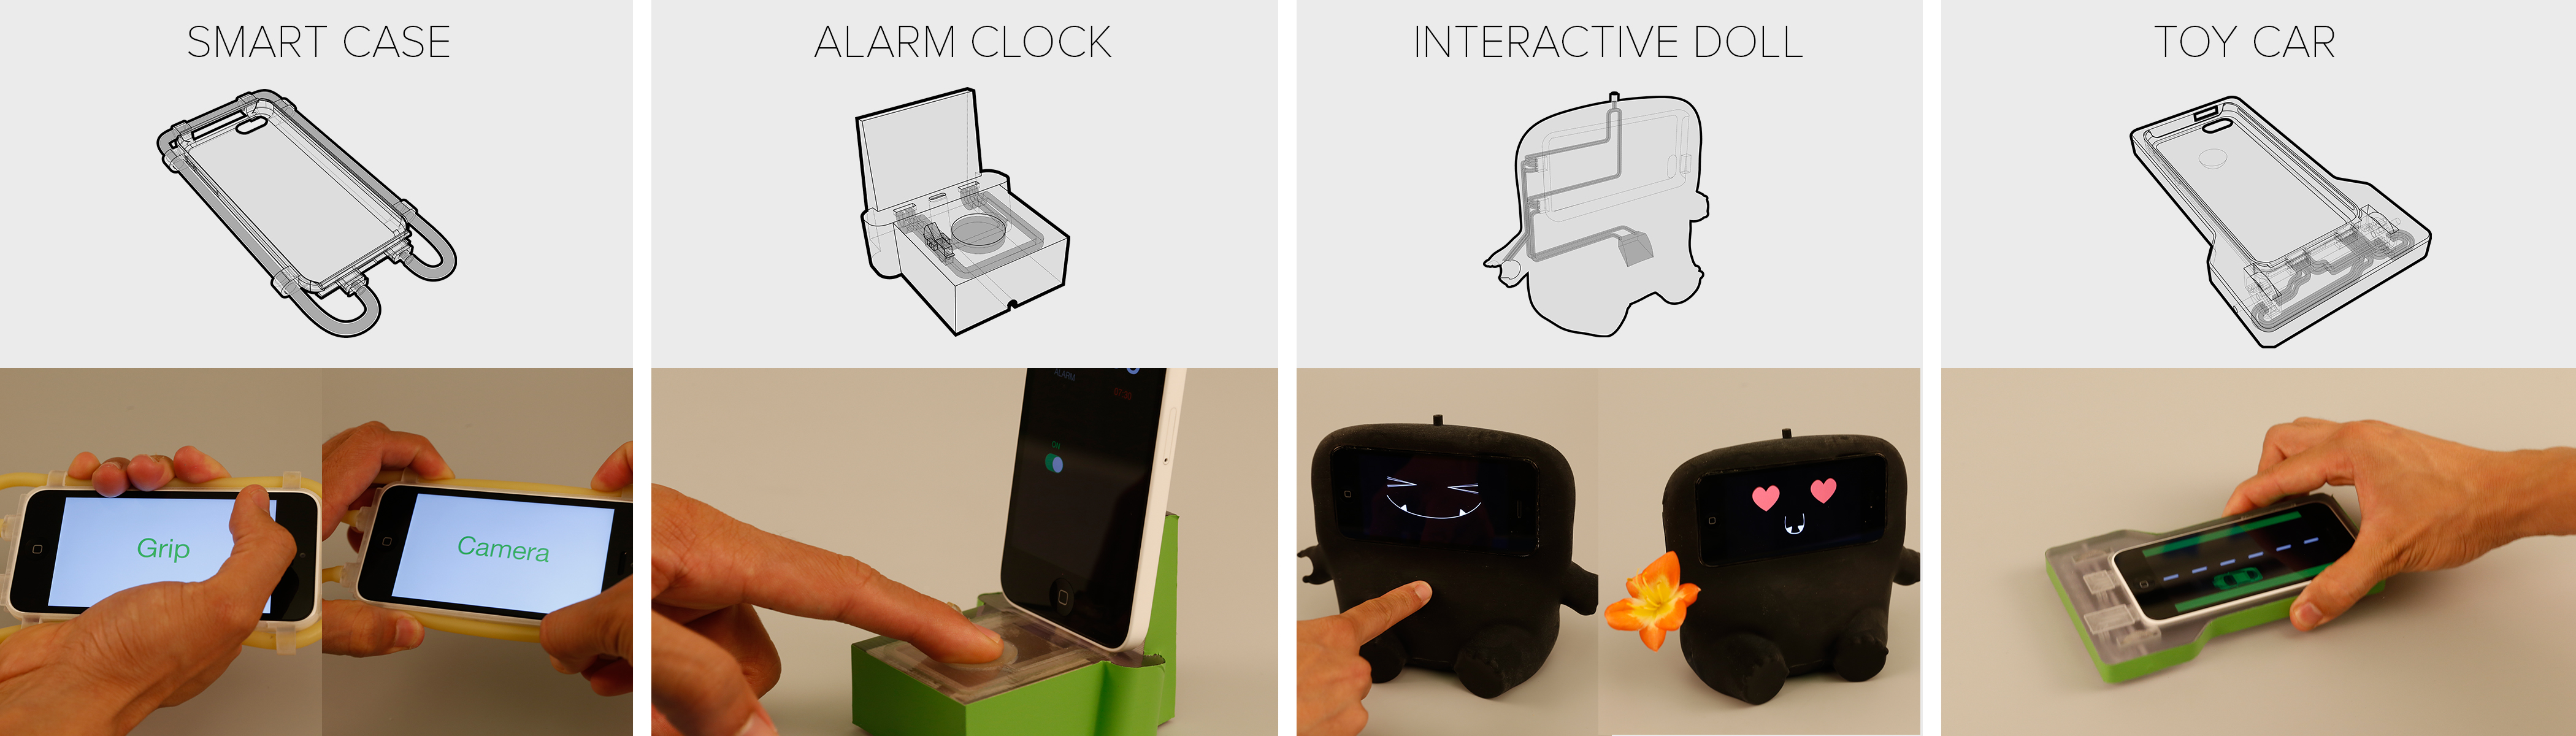 Acoustrument-Passive-Acoustically-Driven-Interactive-Controls-for-Hand-Held-Devices-Image